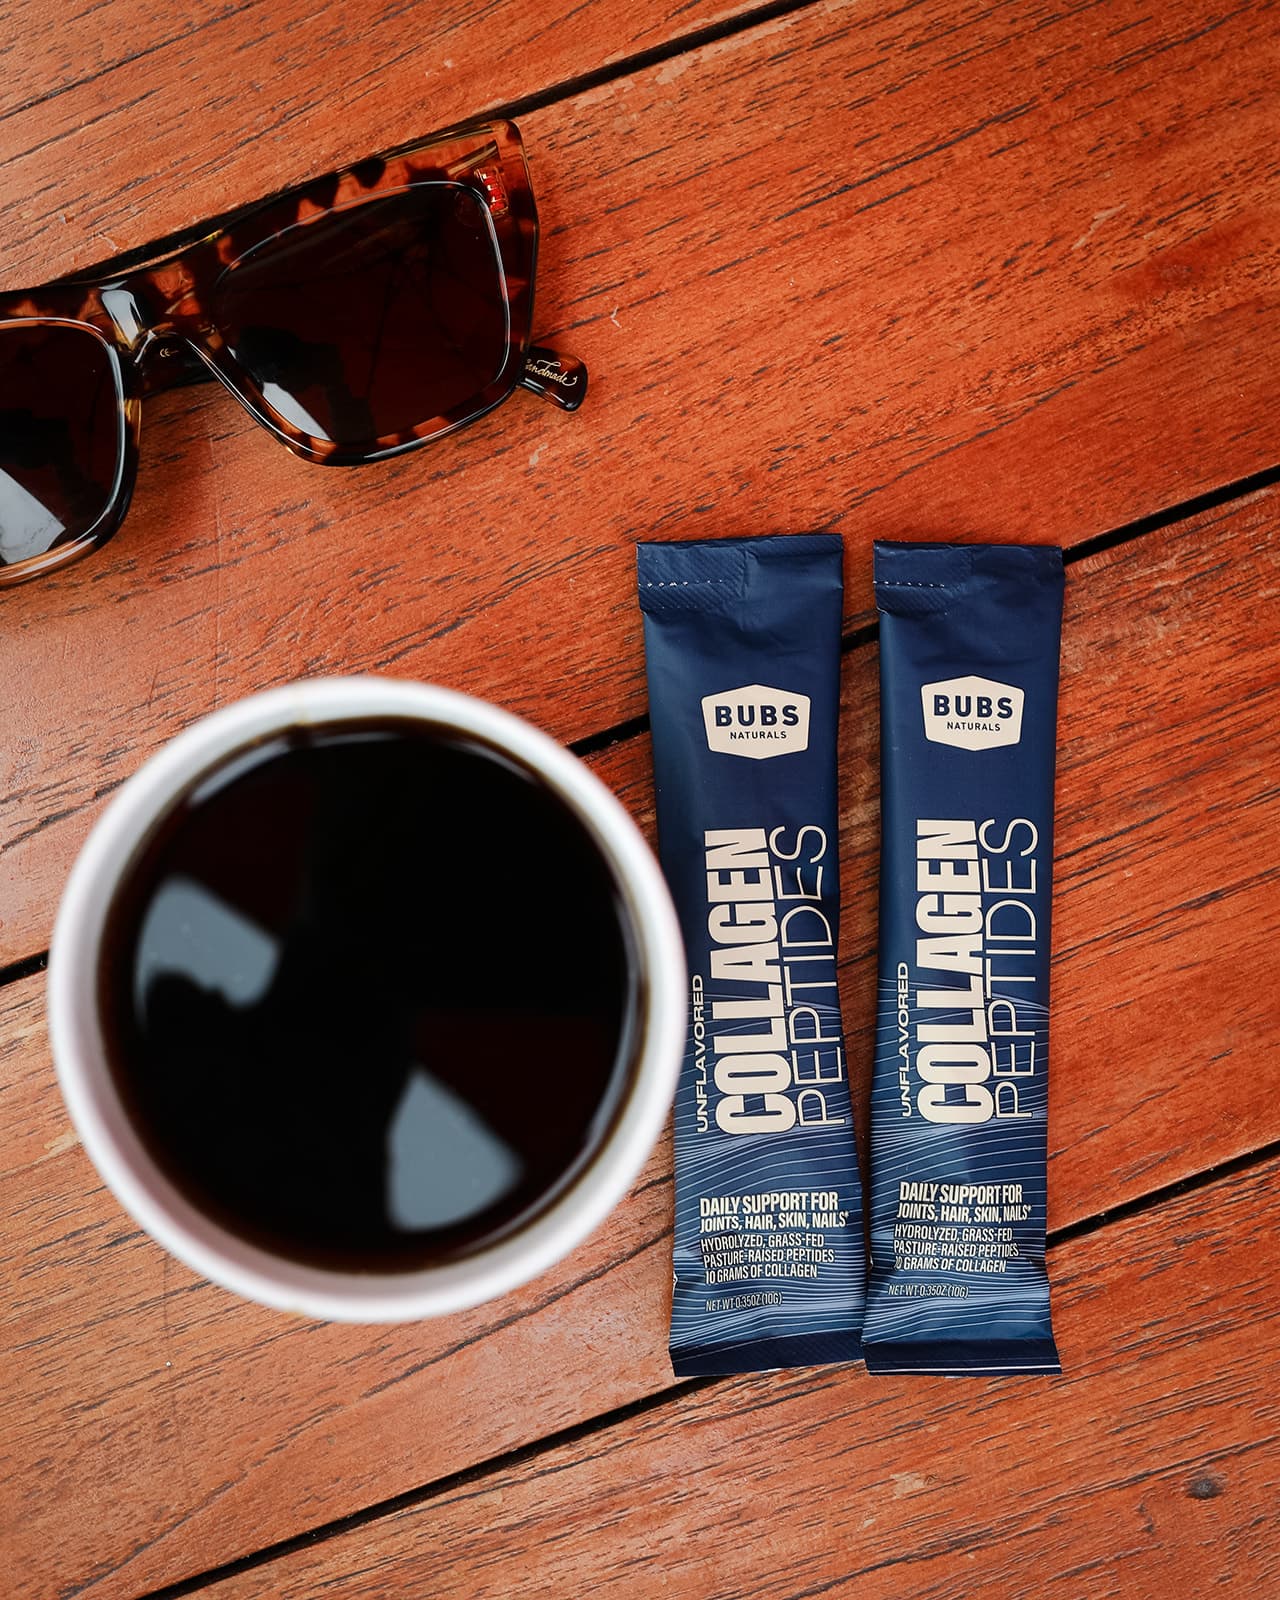 BUBS Naturals Collagen Peptides Stick Packs and Coffee
